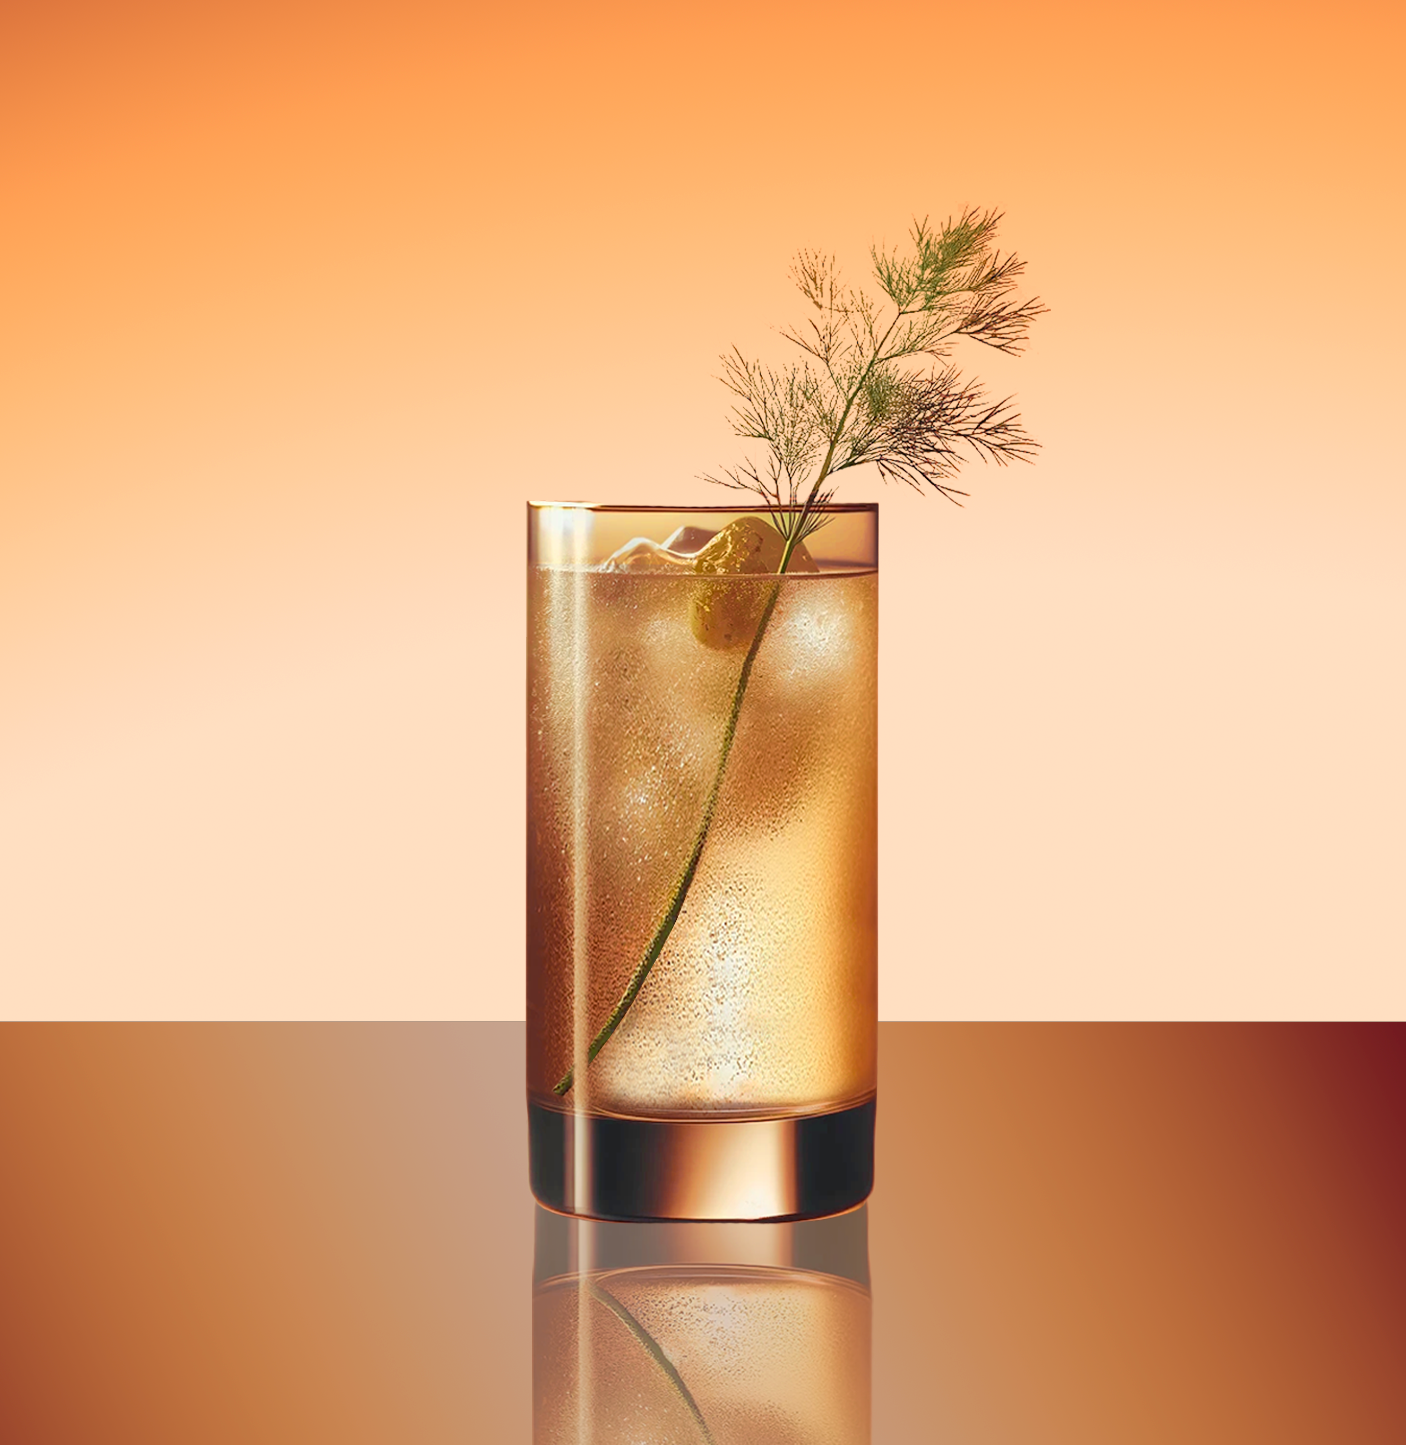 Hot Toddy Cocktail on ice in a tall highball glass with fennel sprig garnish. orange background and mirror surface